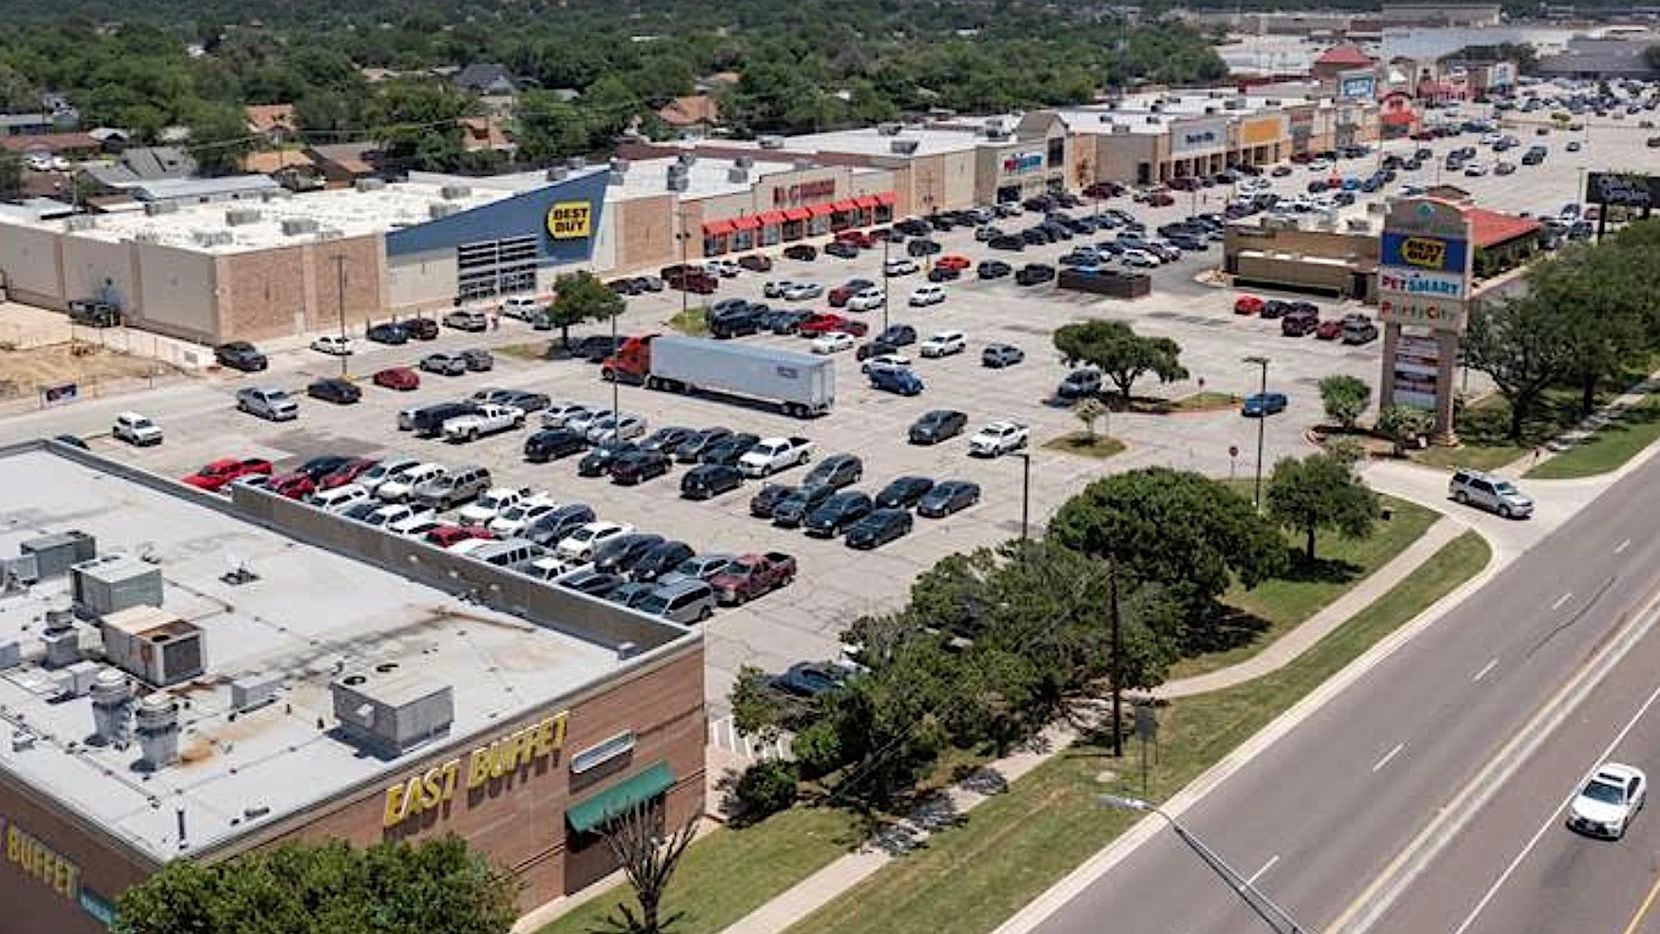 Dallas-based Corsair Property has purchased the Irving Market Center shopping center on...